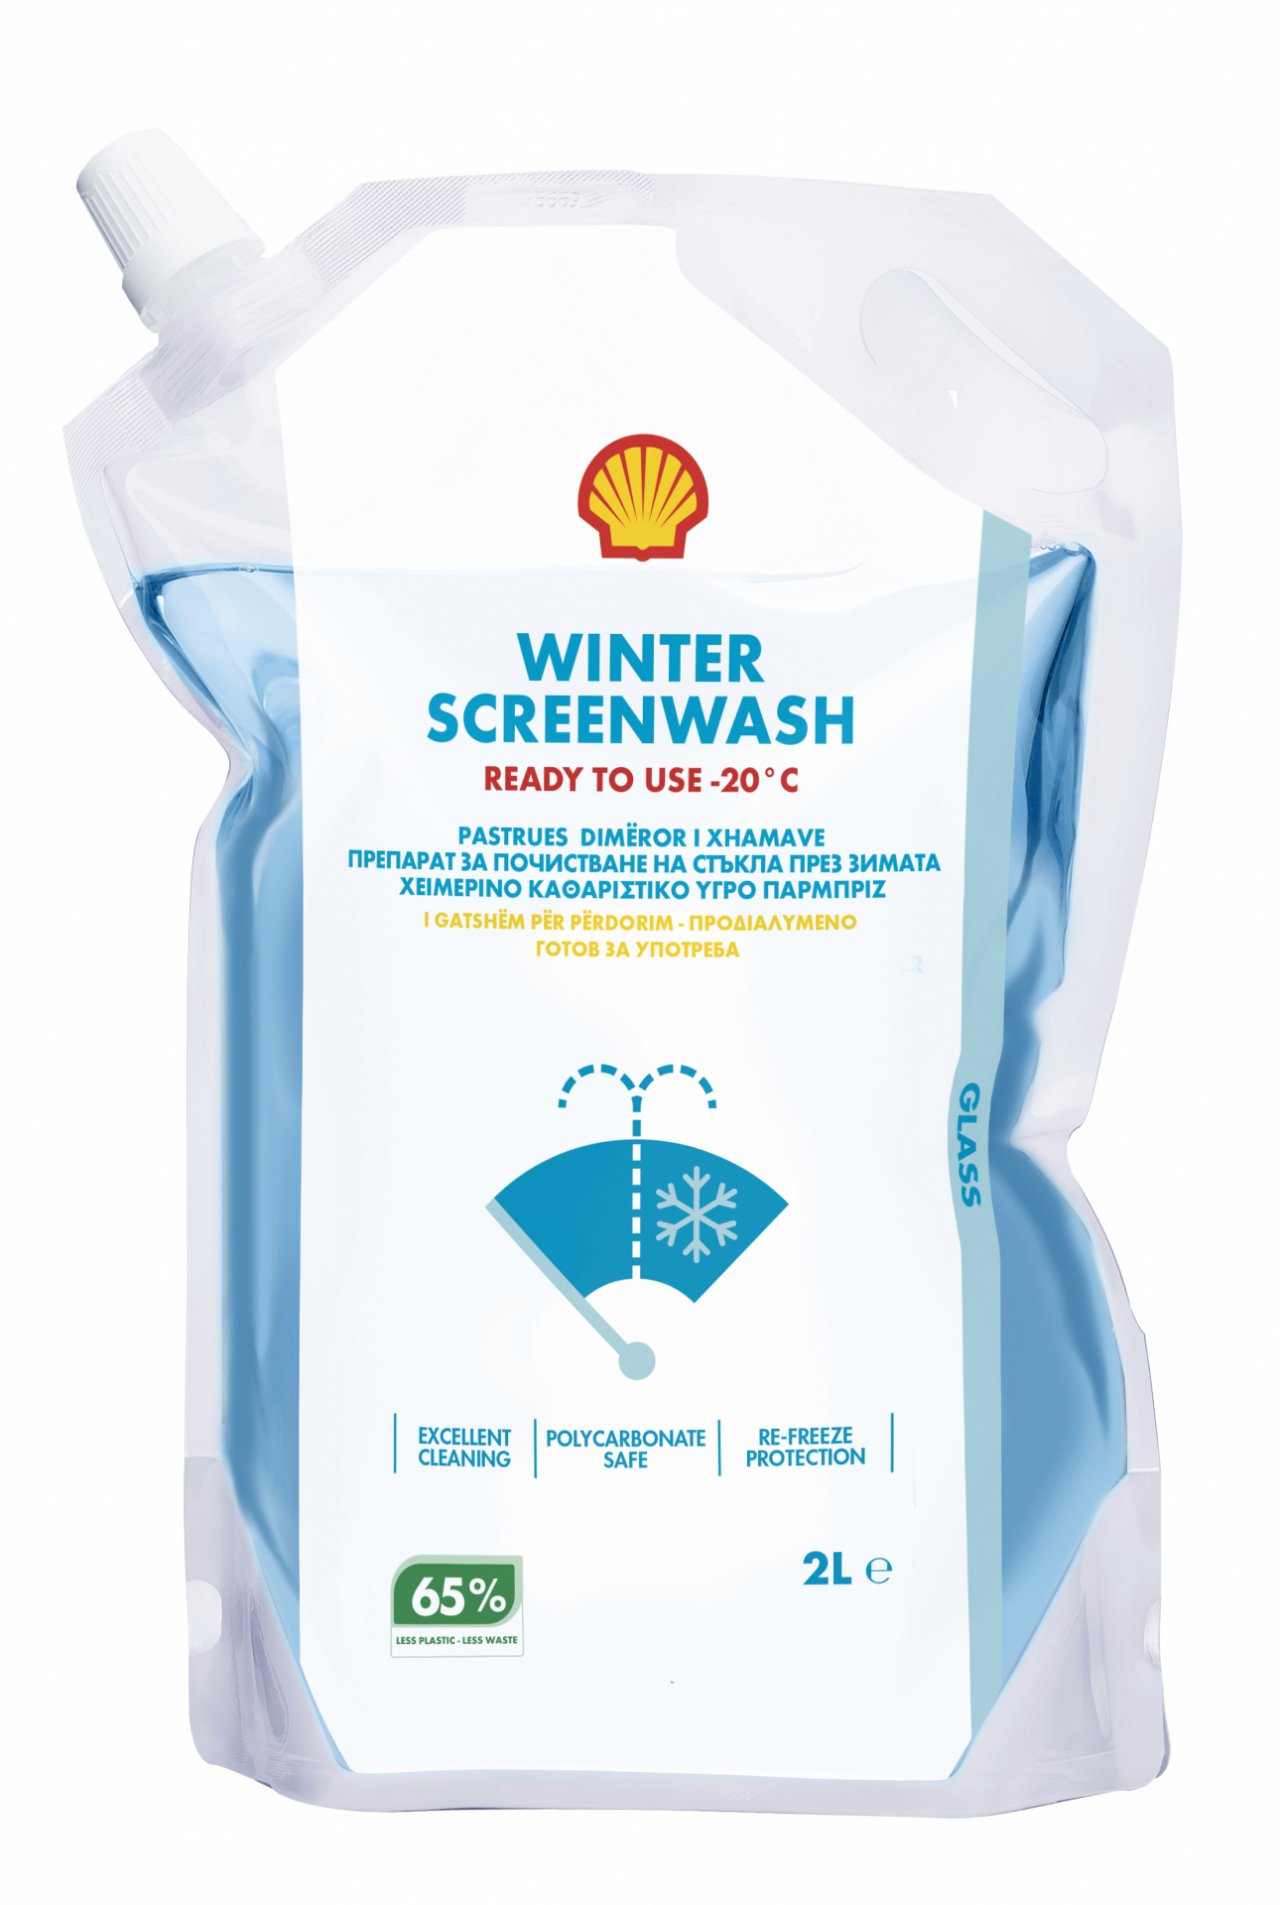 Winter Screenwash ready to use -20°C (pouch)